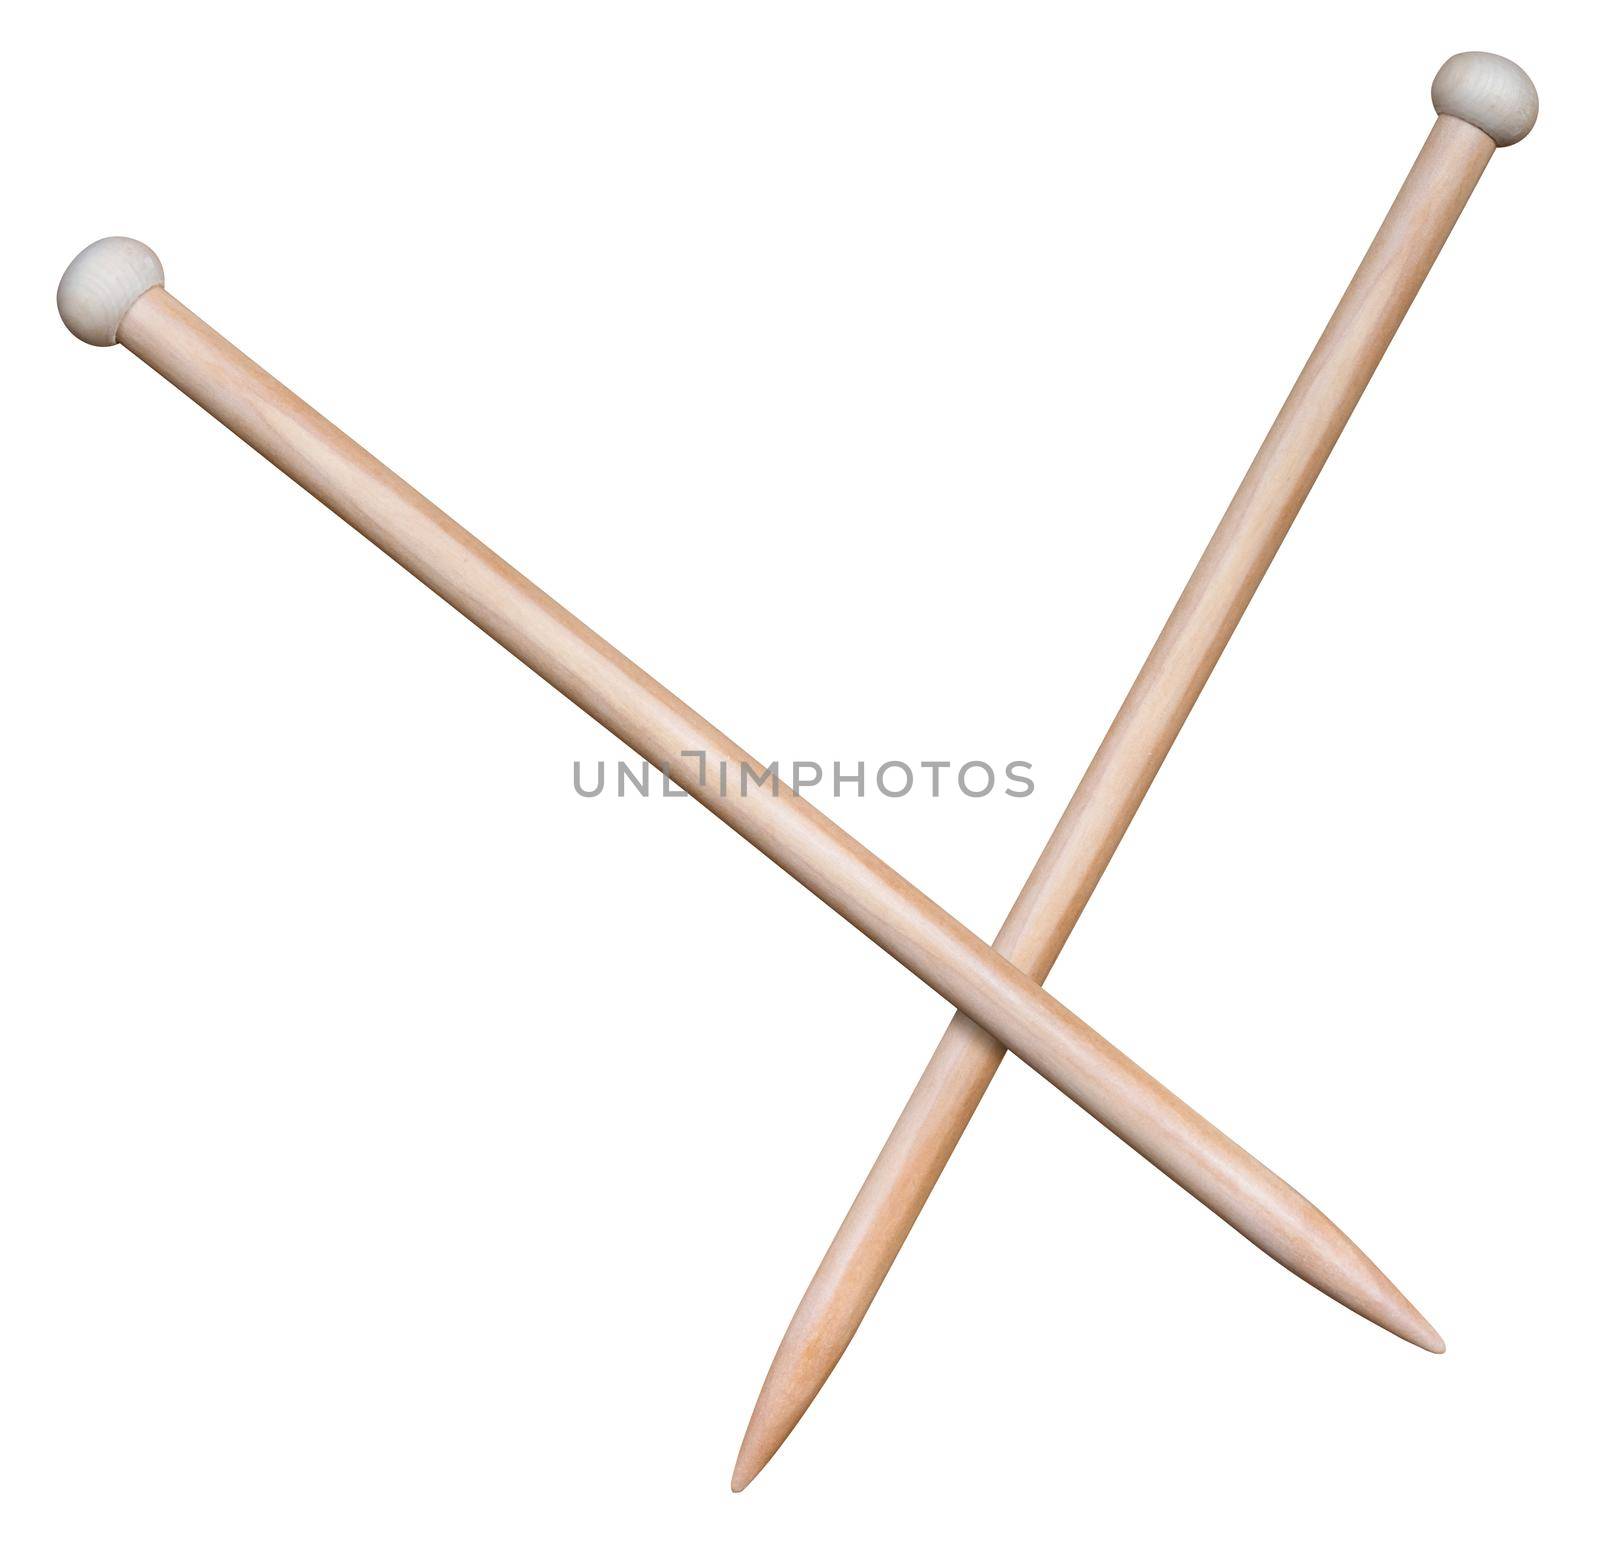 A Pair Of Wooden Knitting Needles, Isolated On A White Background